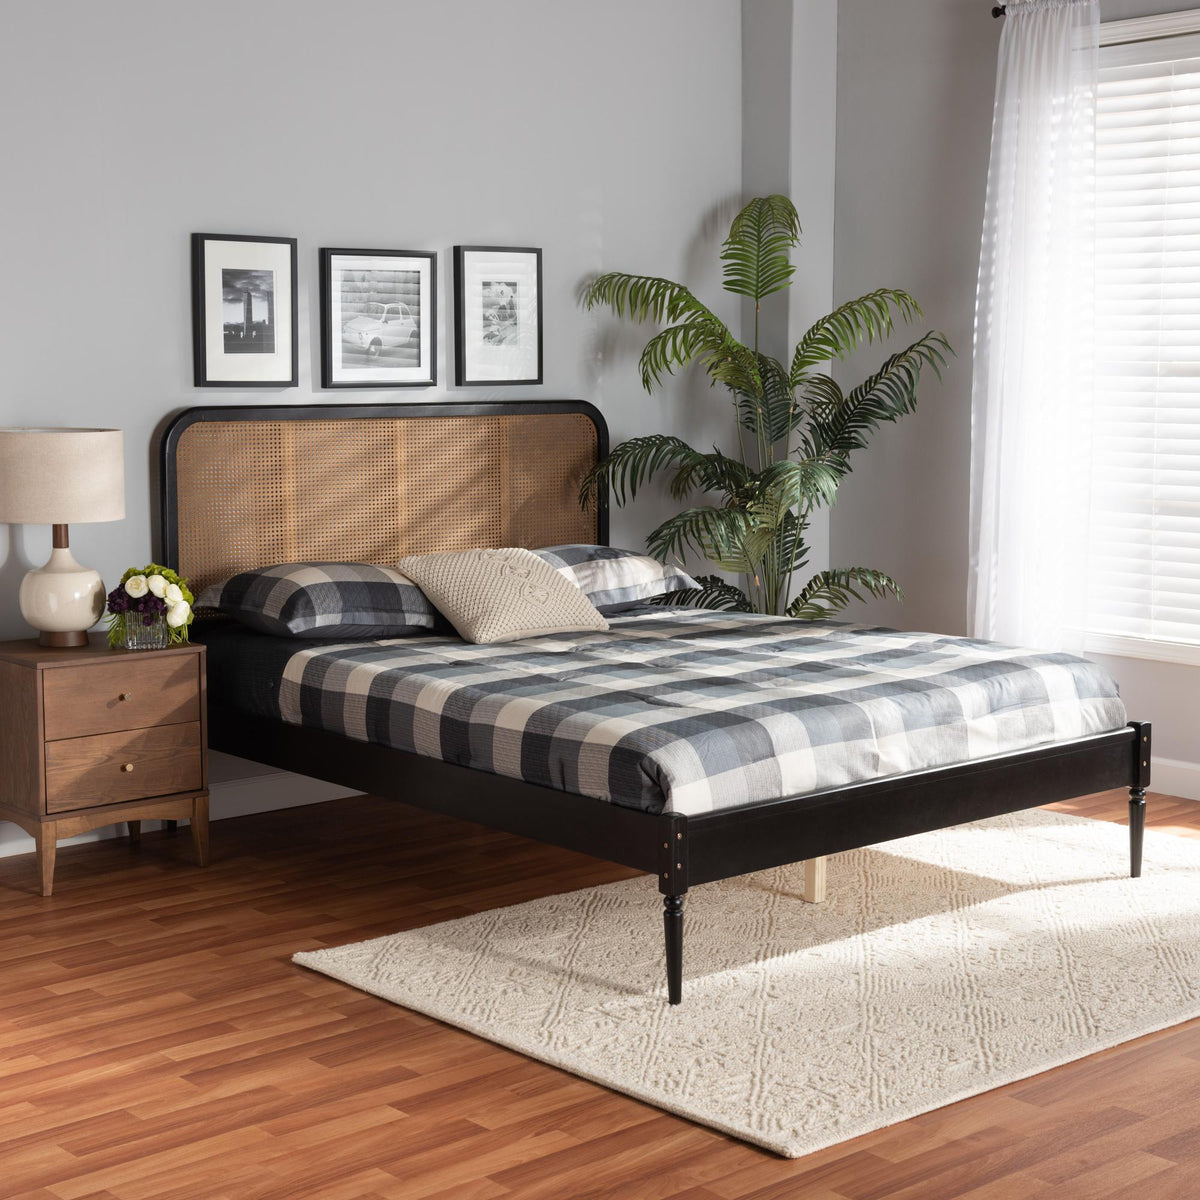 Baxton Studio Elston Mid-Century Modern Charcoal Finished Wood And Synthetic Rattan Queen Size Platform Bed - MG0056-Walnut Rattan/Black-Queen